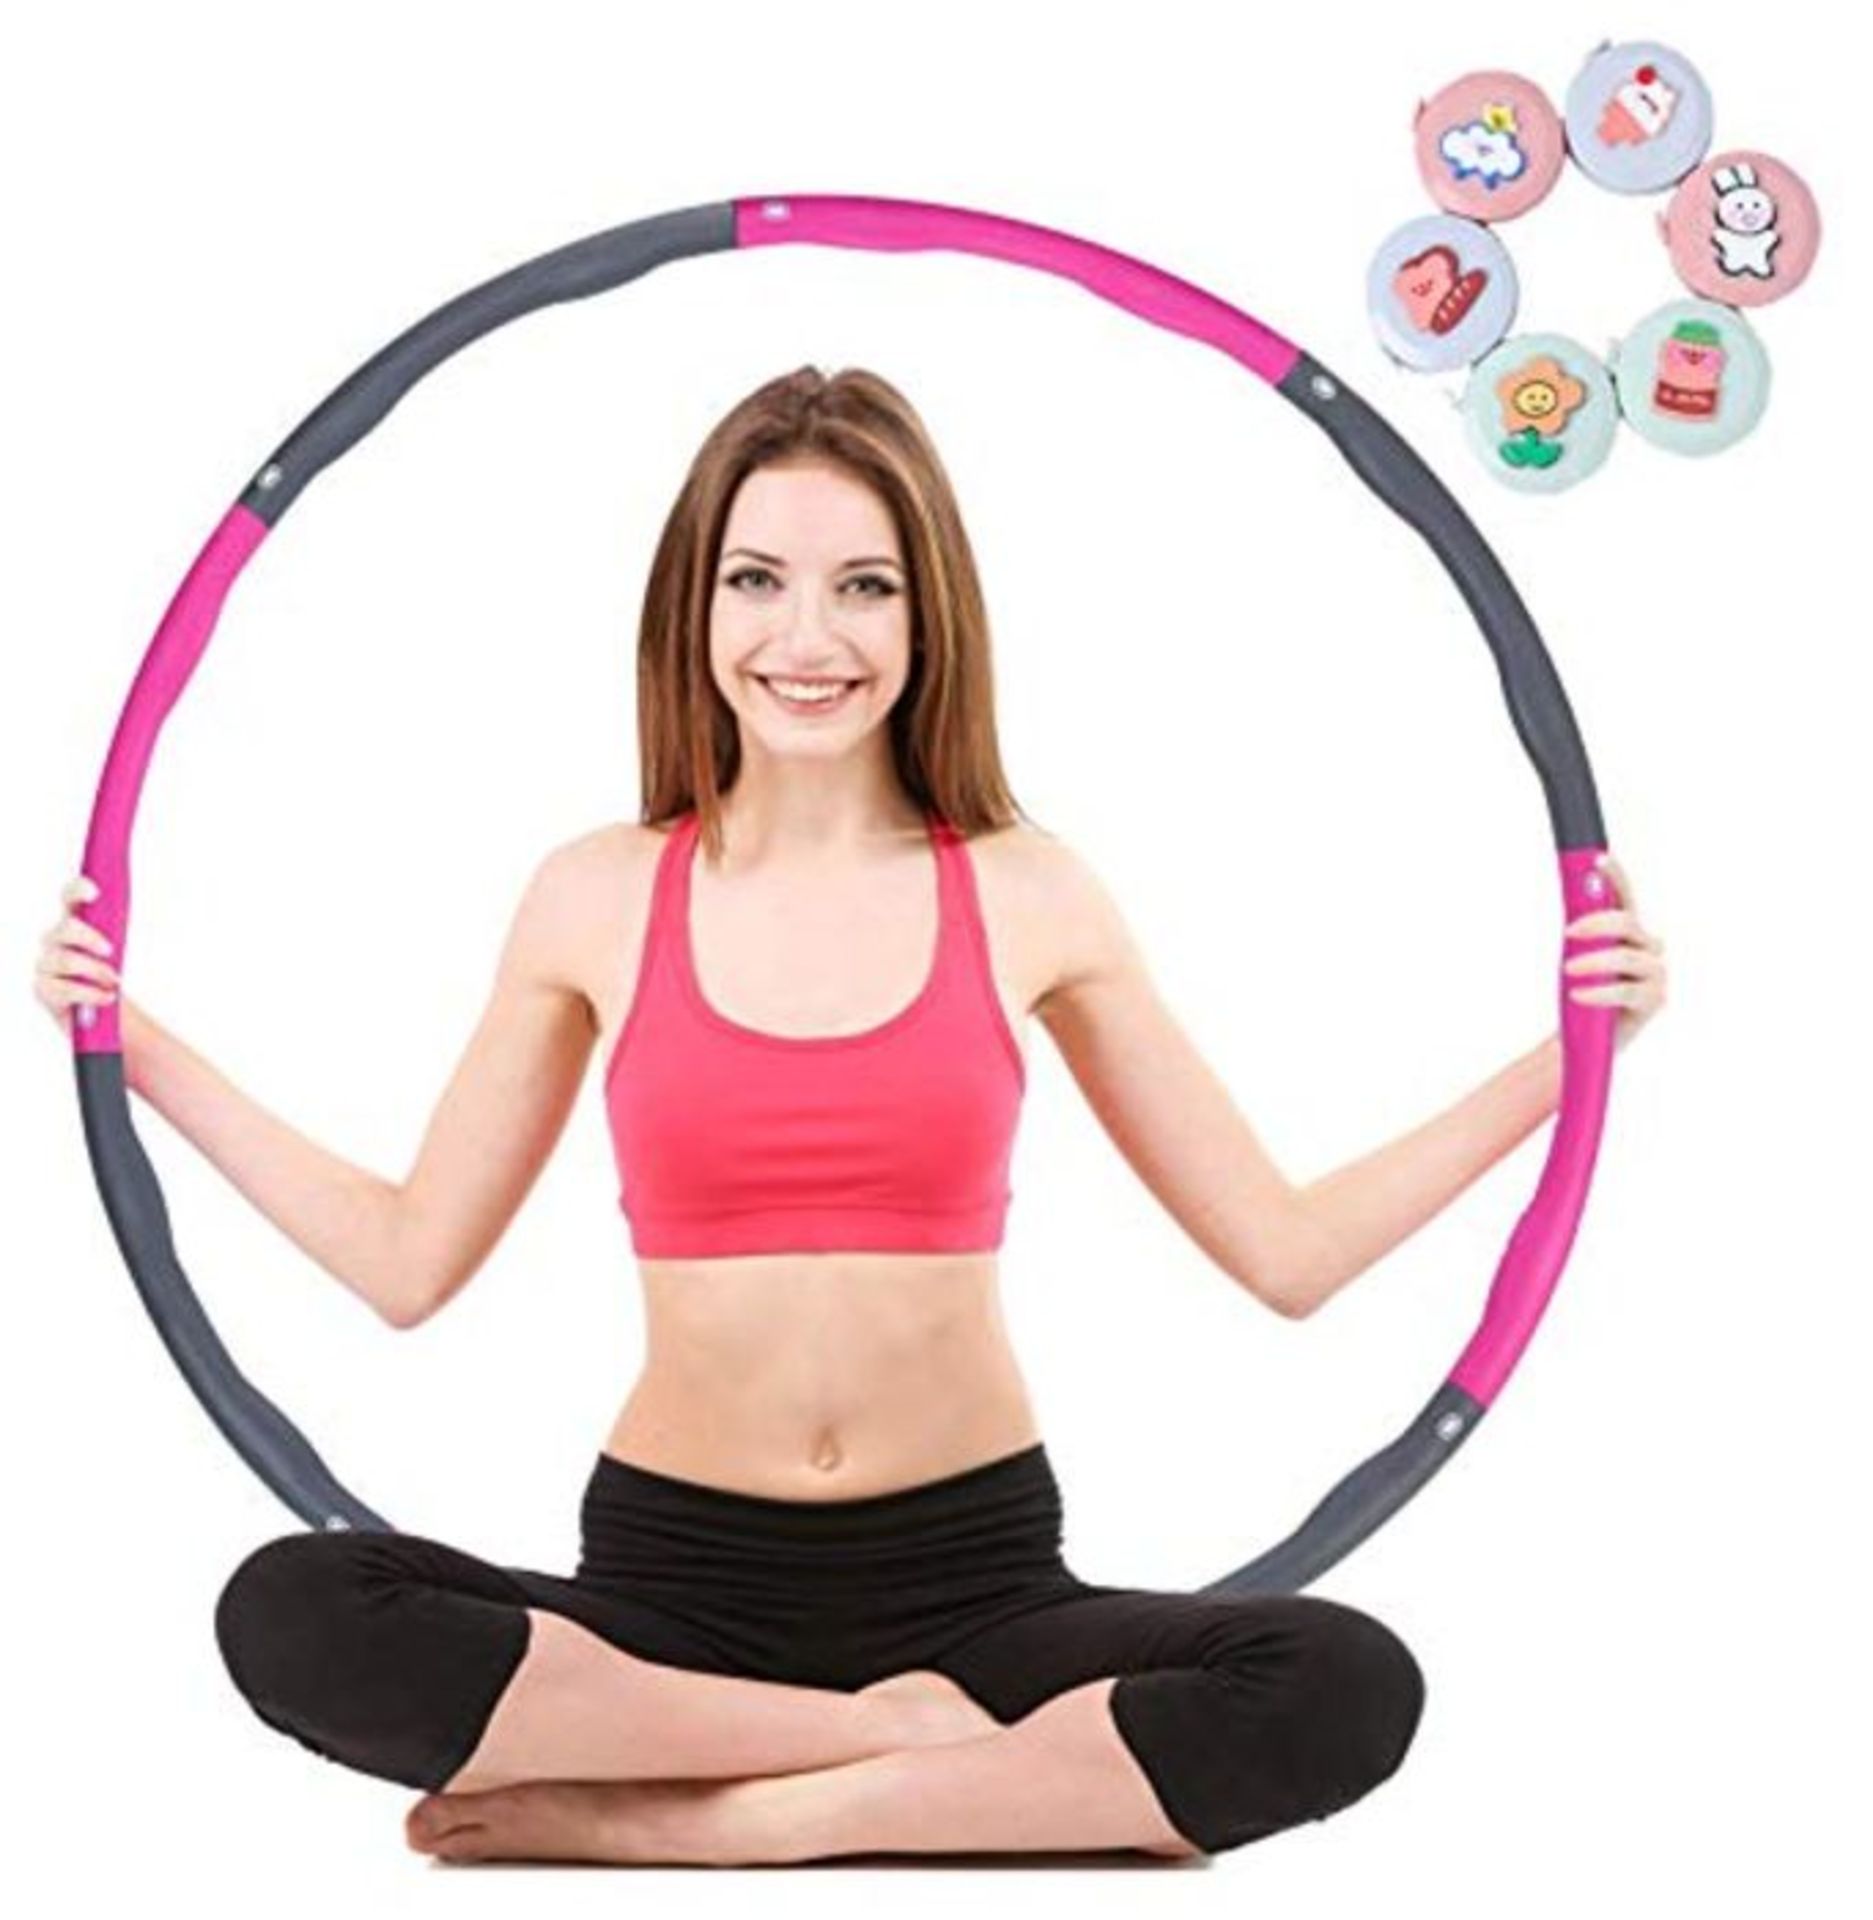 XHTANG Hula Hoop, Hula Hoop Which Can Be Used For Weight Loss And Massage, 8 Segments,